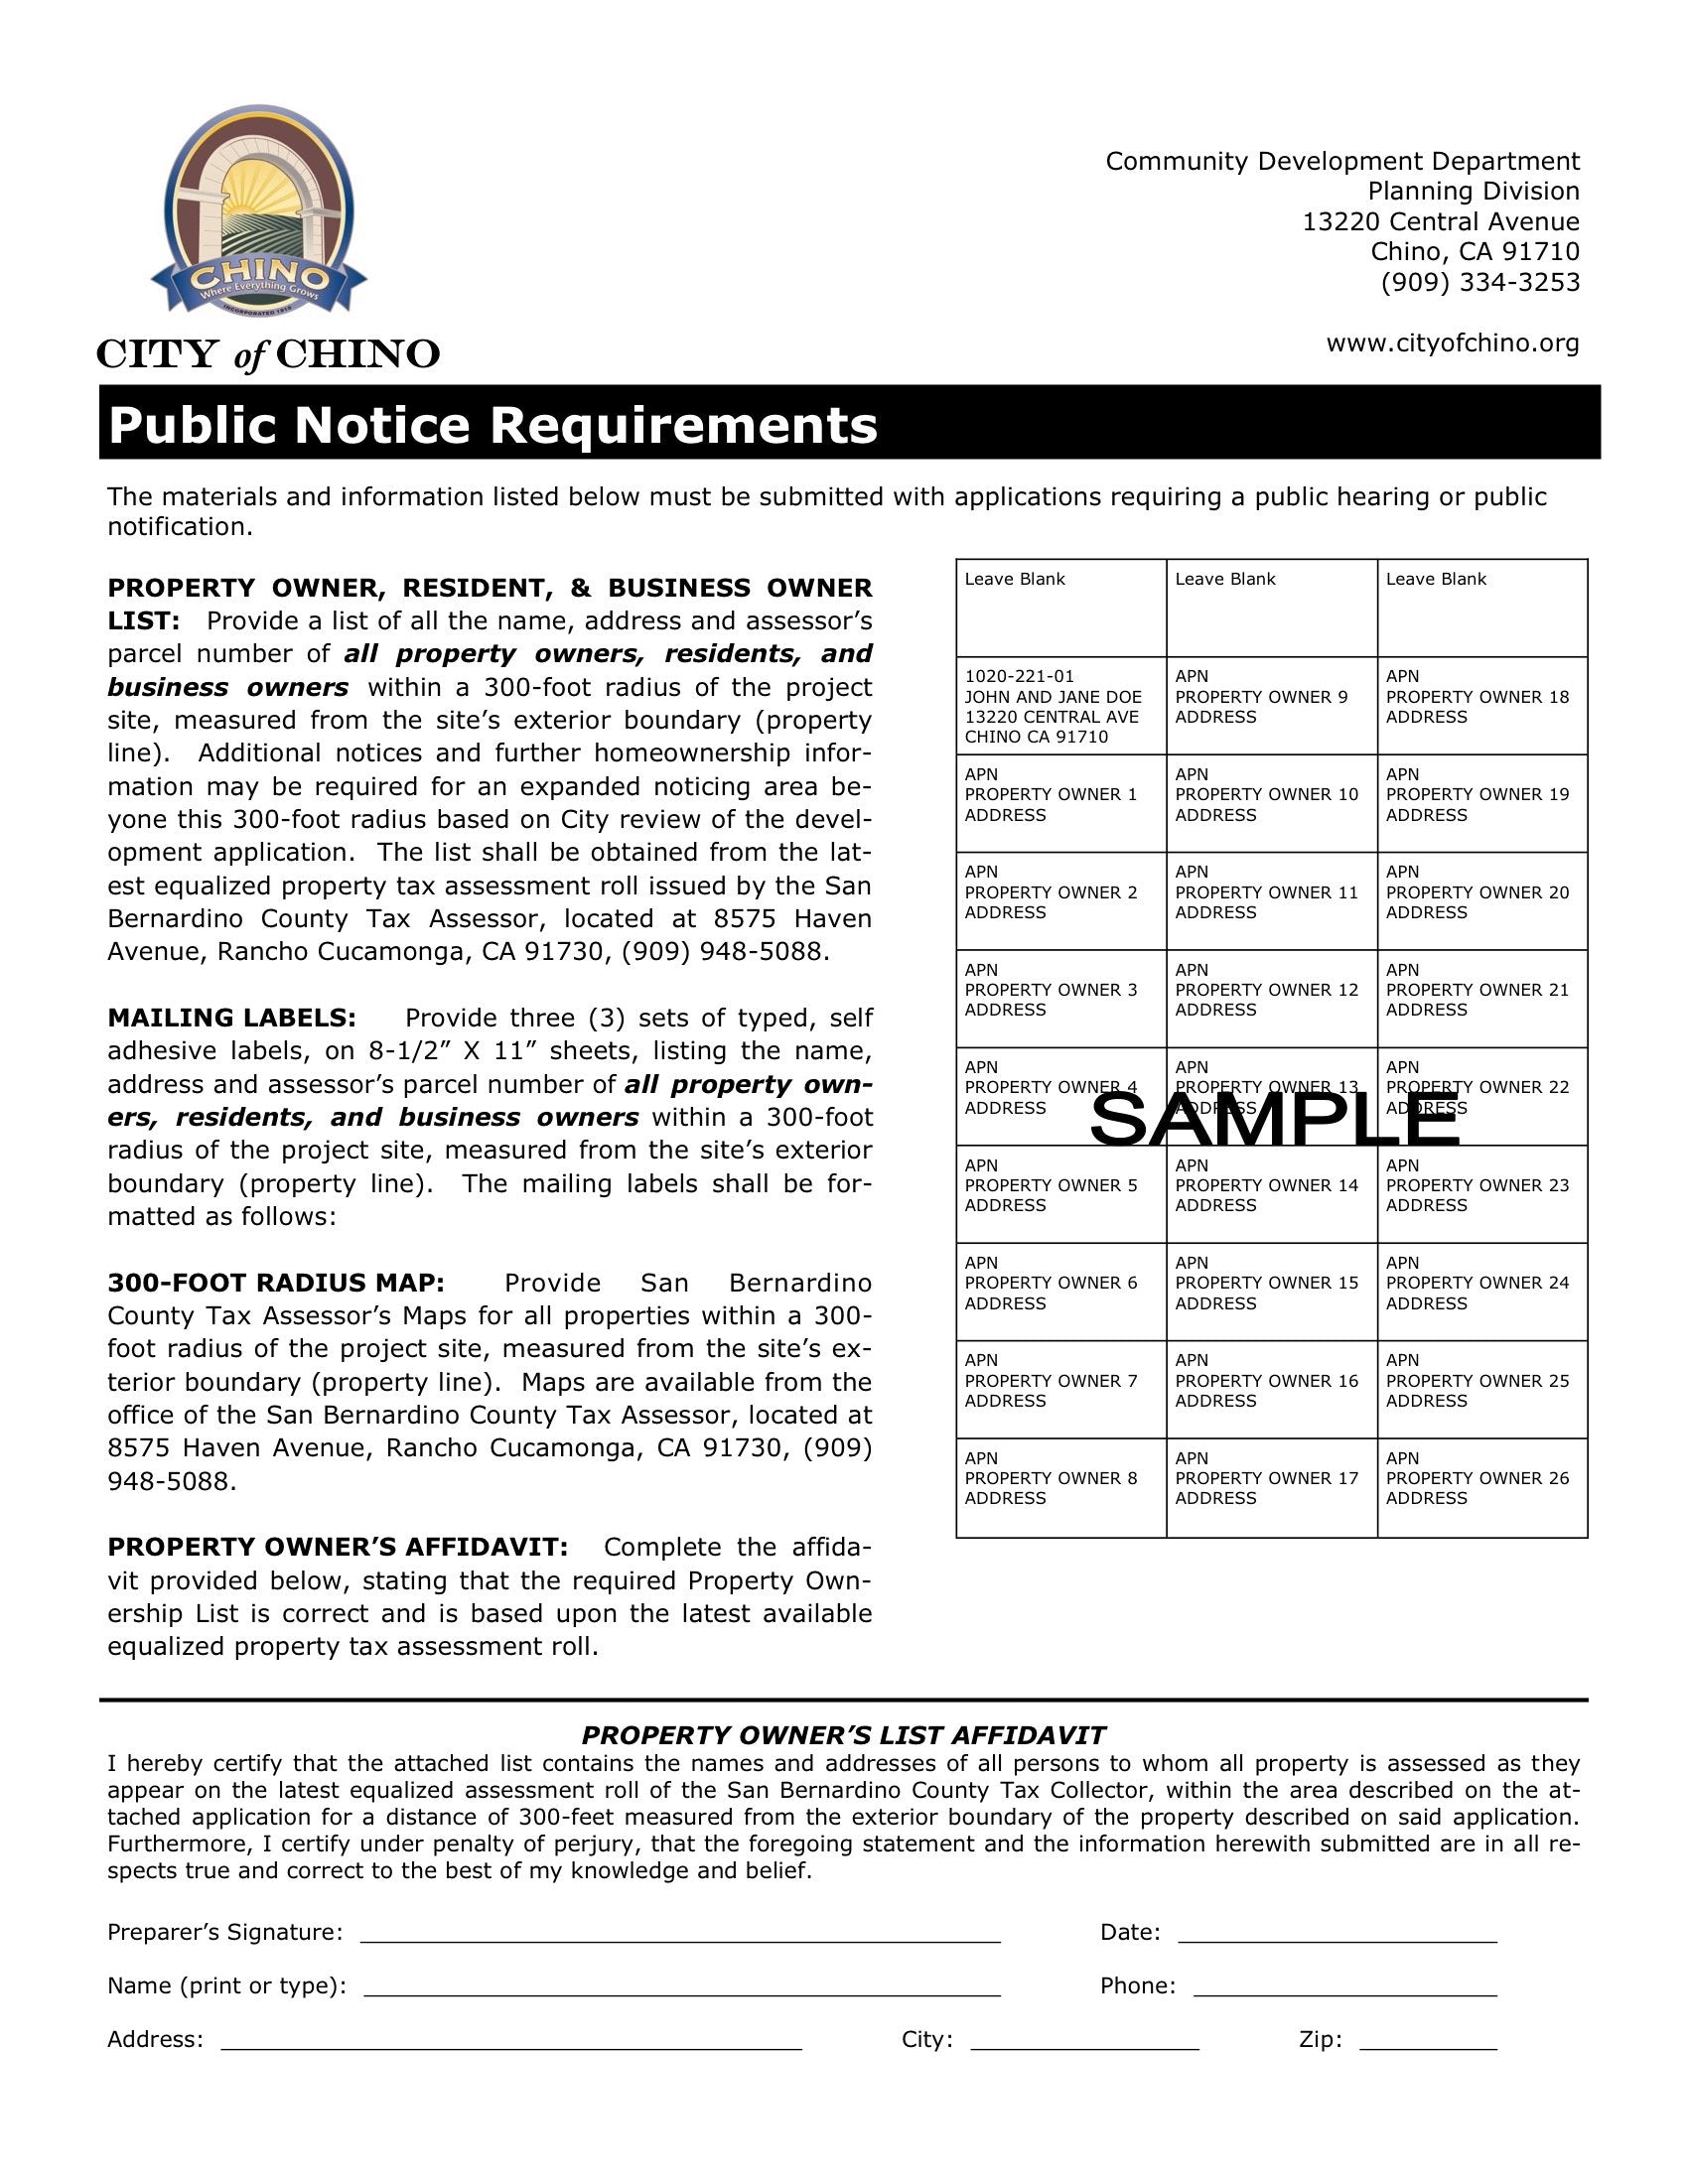 Chino Public Notice Requirements Community Development Department. Property Owner List, Mailing Labels, 300-Foot Radius Map, Property Owners List Affidavit